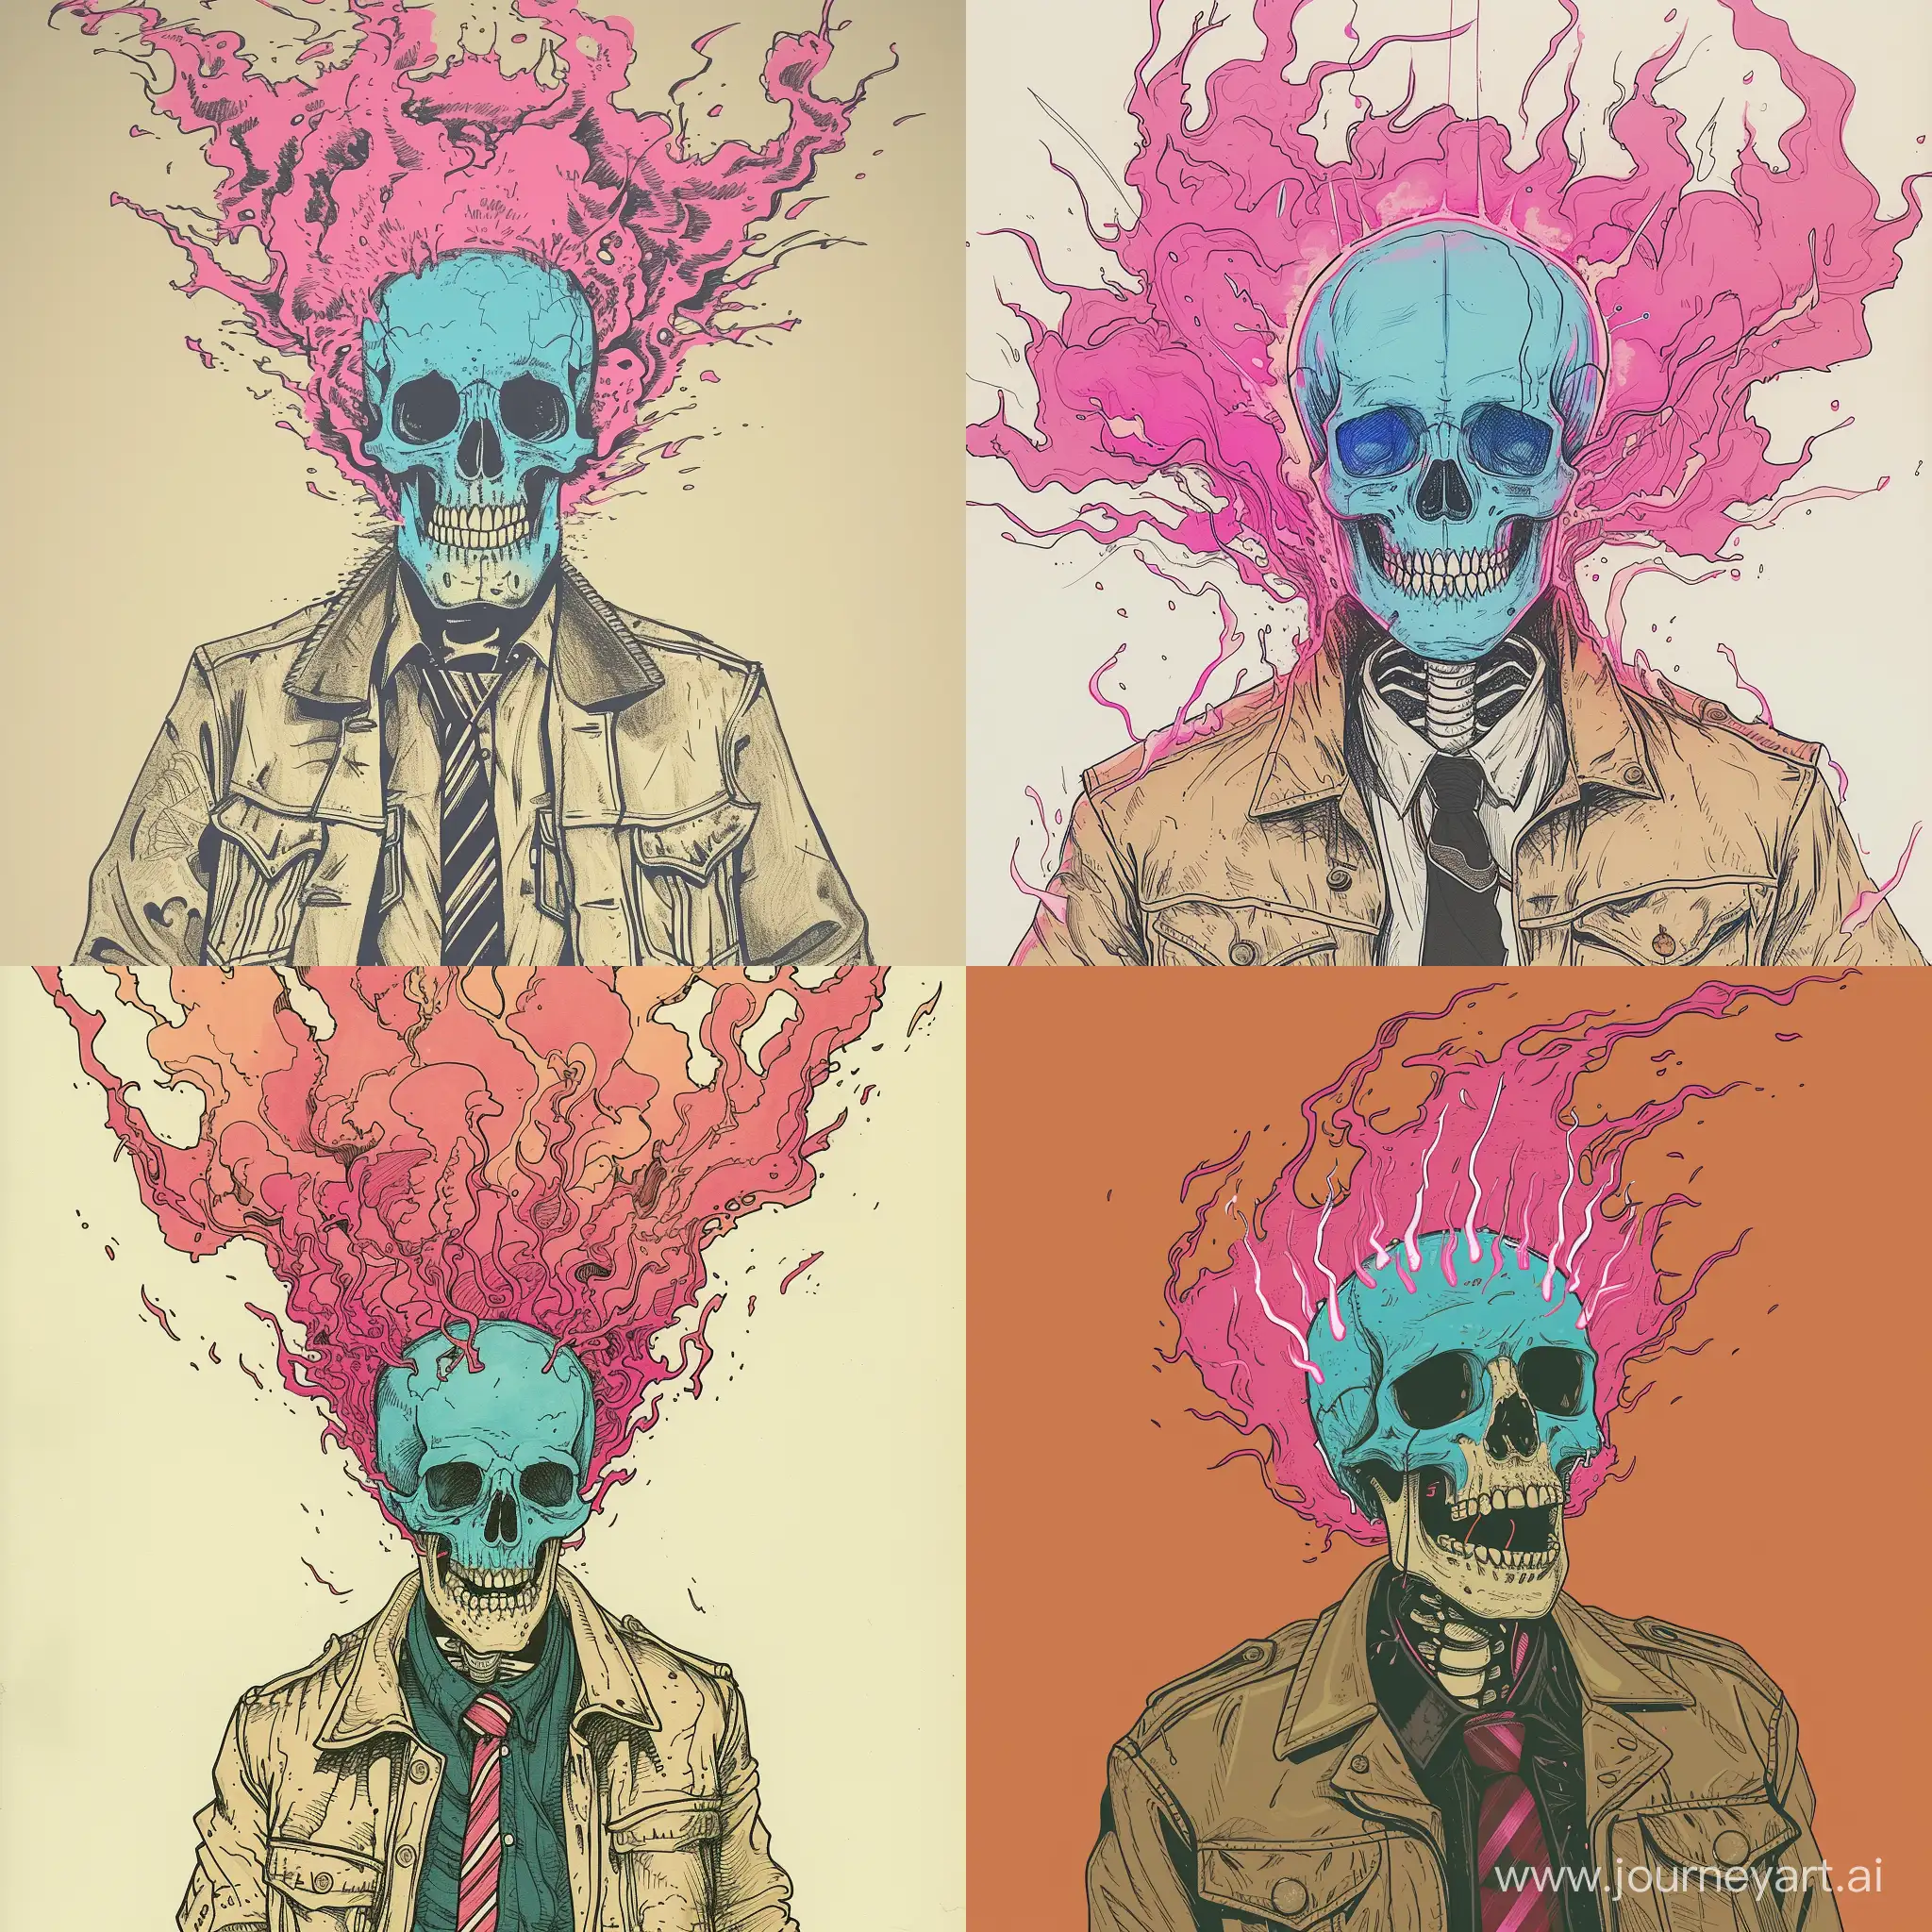 Gigantic-Skeleton-Boss-with-Blue-Skull-and-Pink-Flames-in-Stylish-Attire